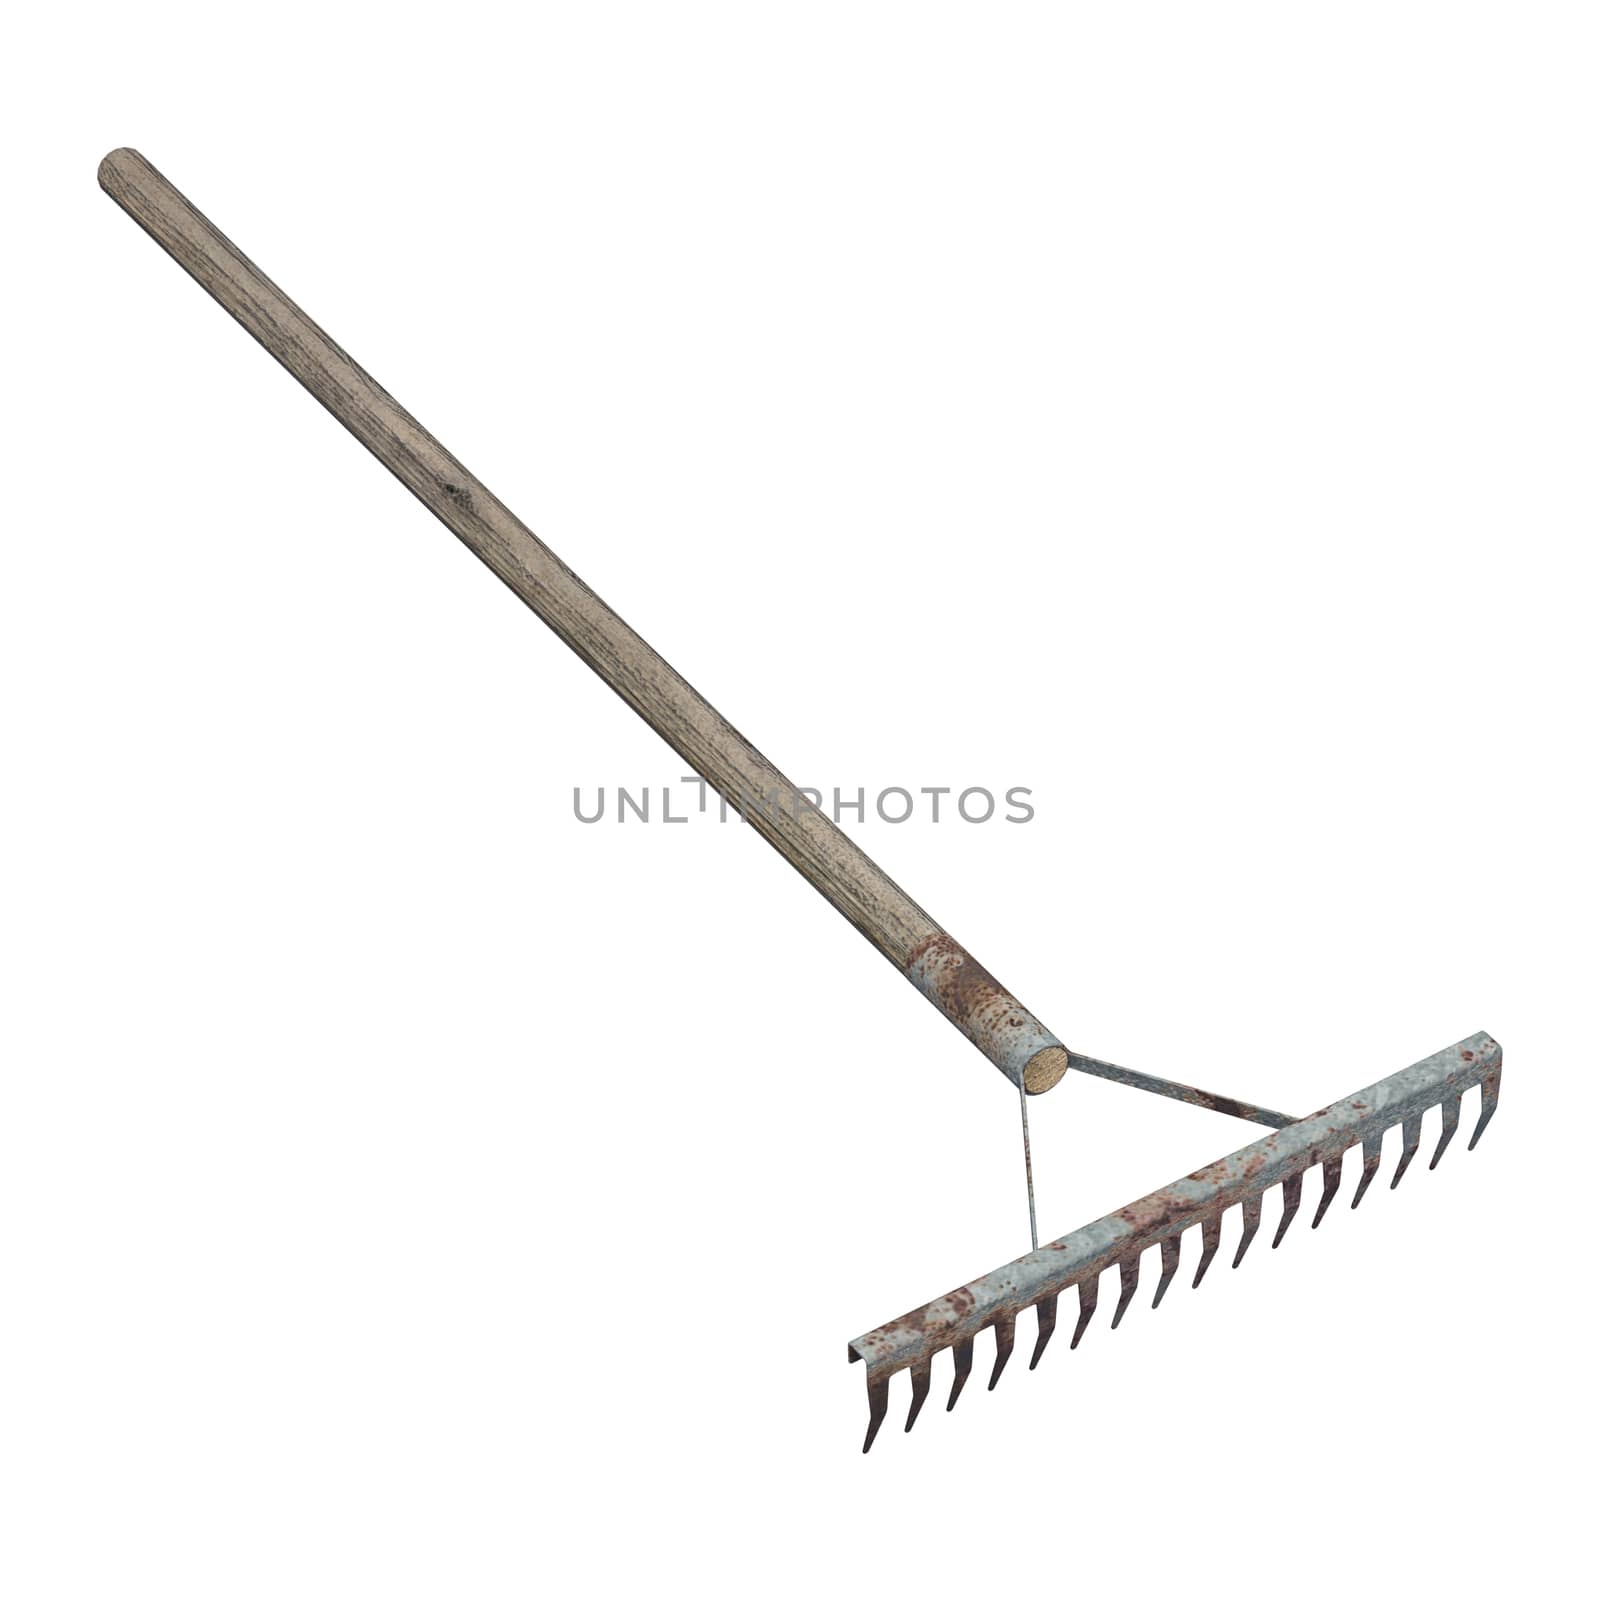 3D digital render of an old iron rake isolated on white background